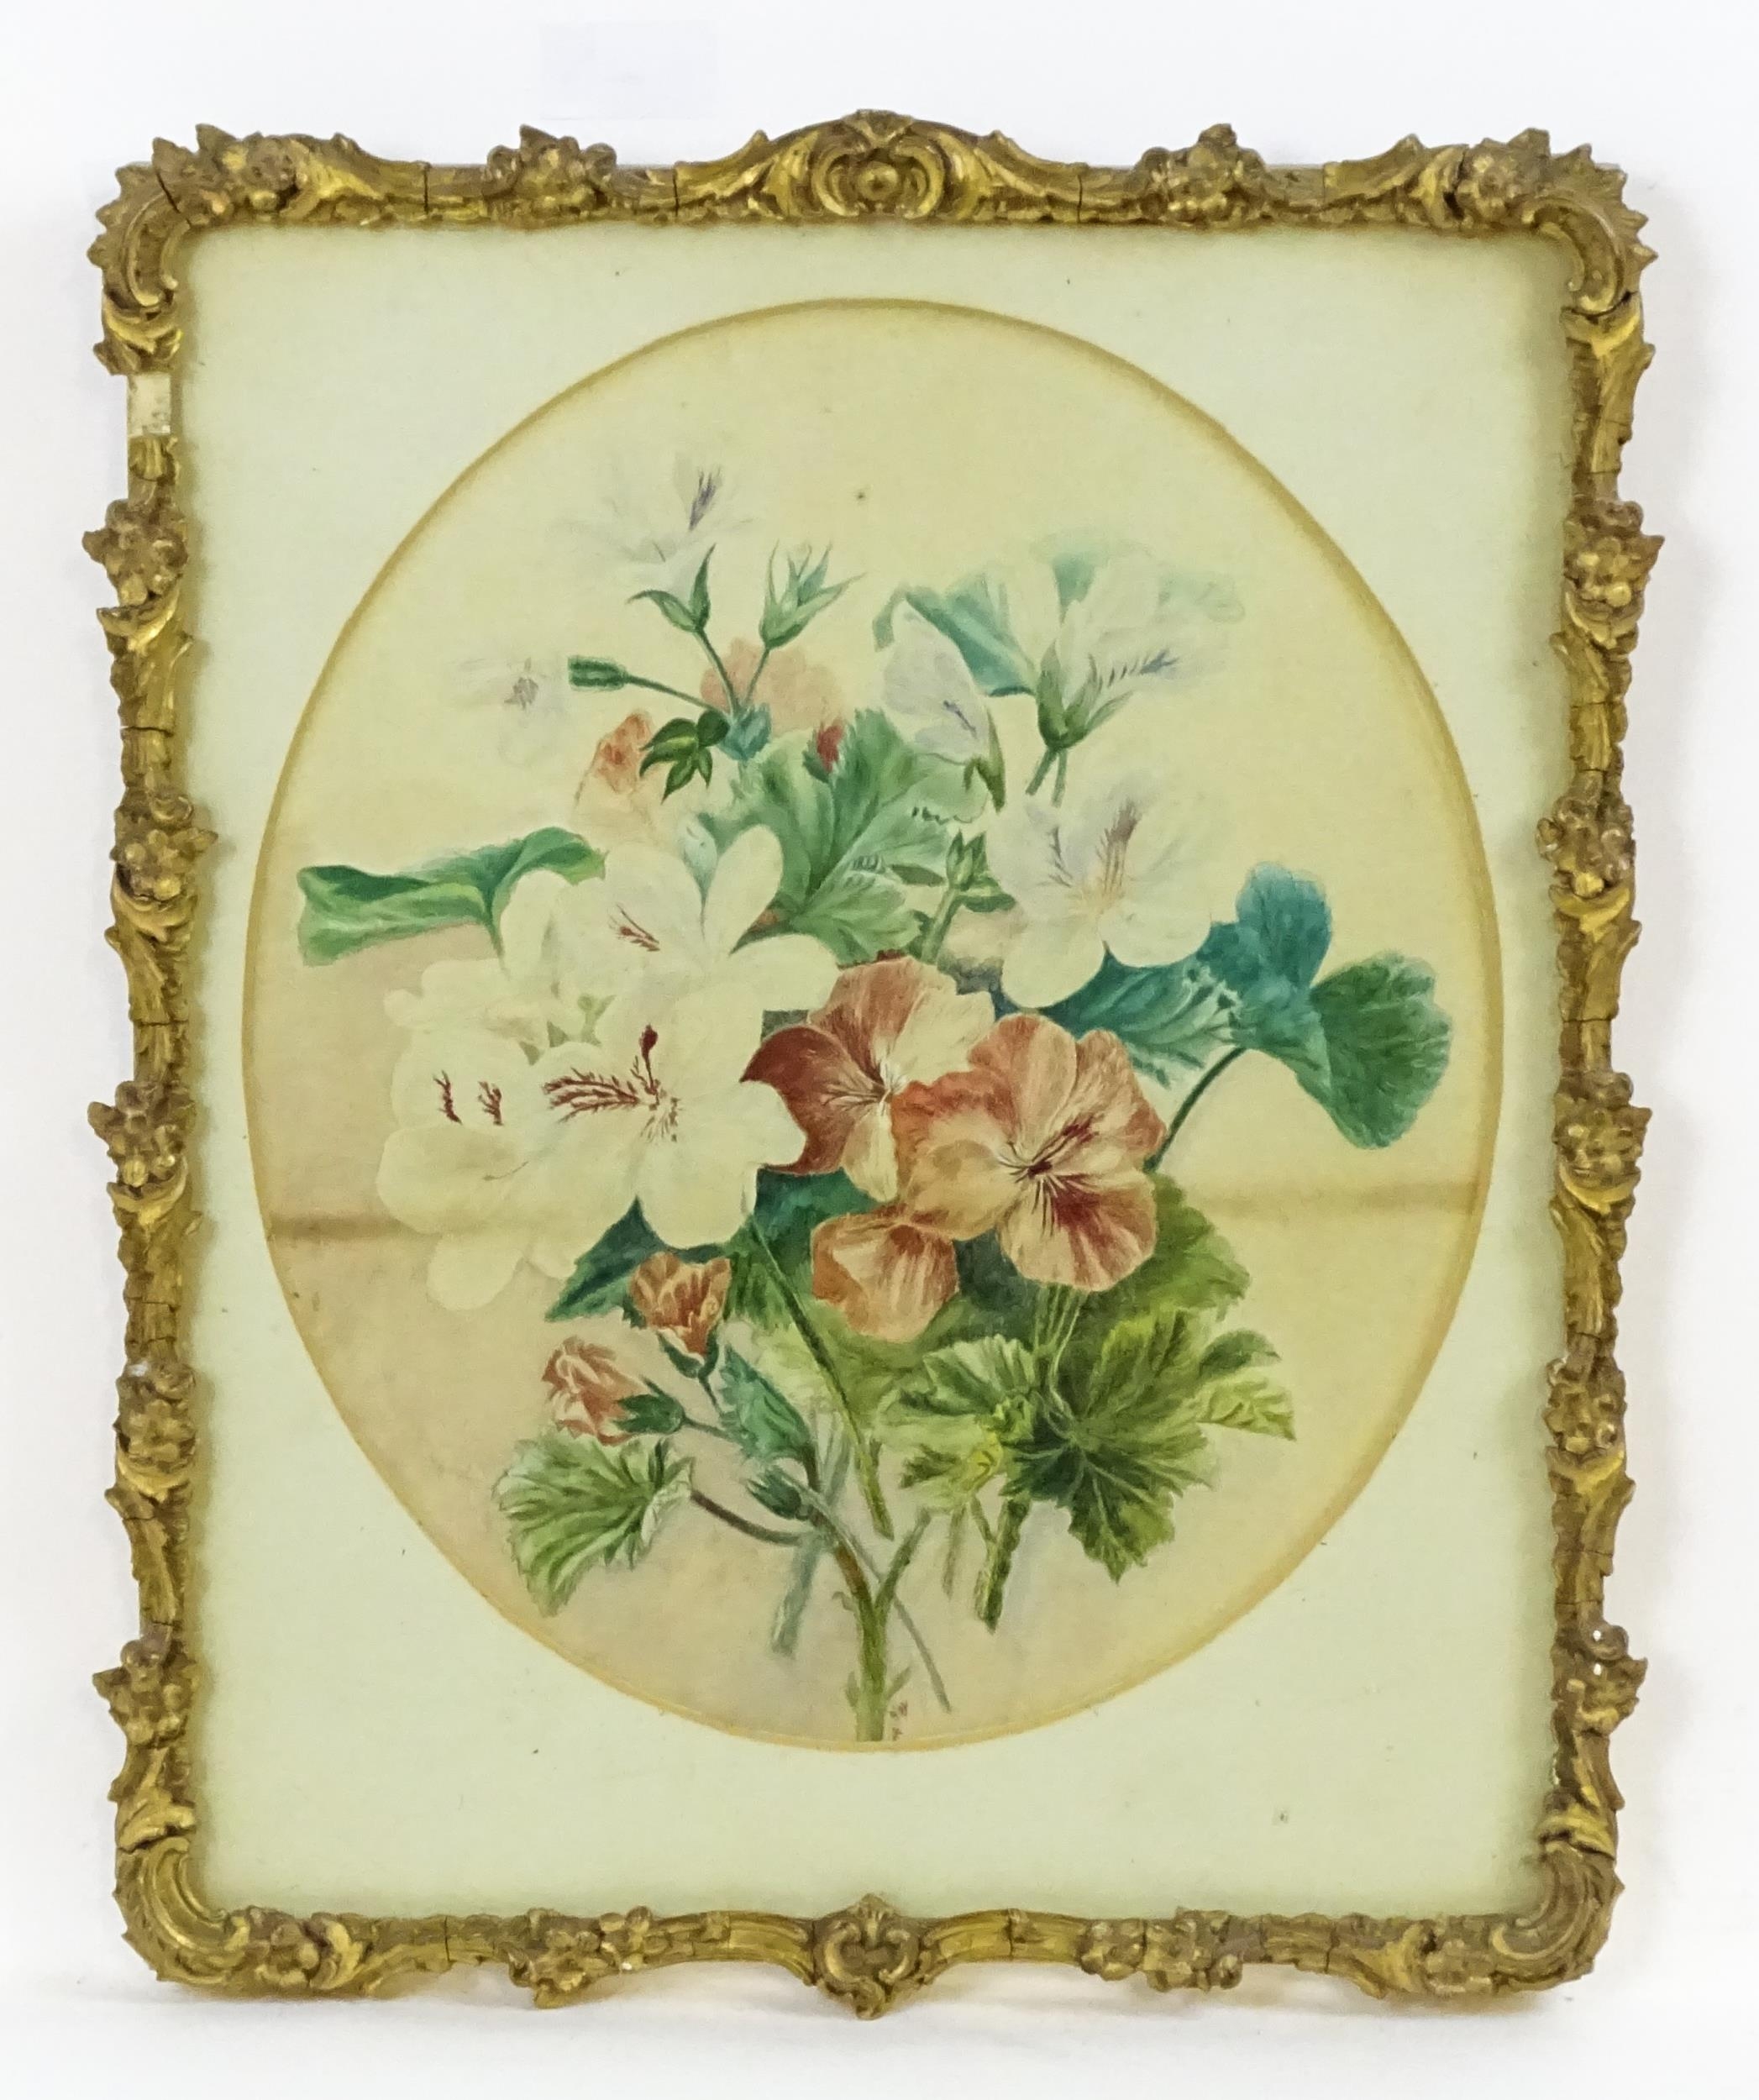 E. Elms, 19th century, Watercolour, A still life study with flowers. Signed and dated (18)84